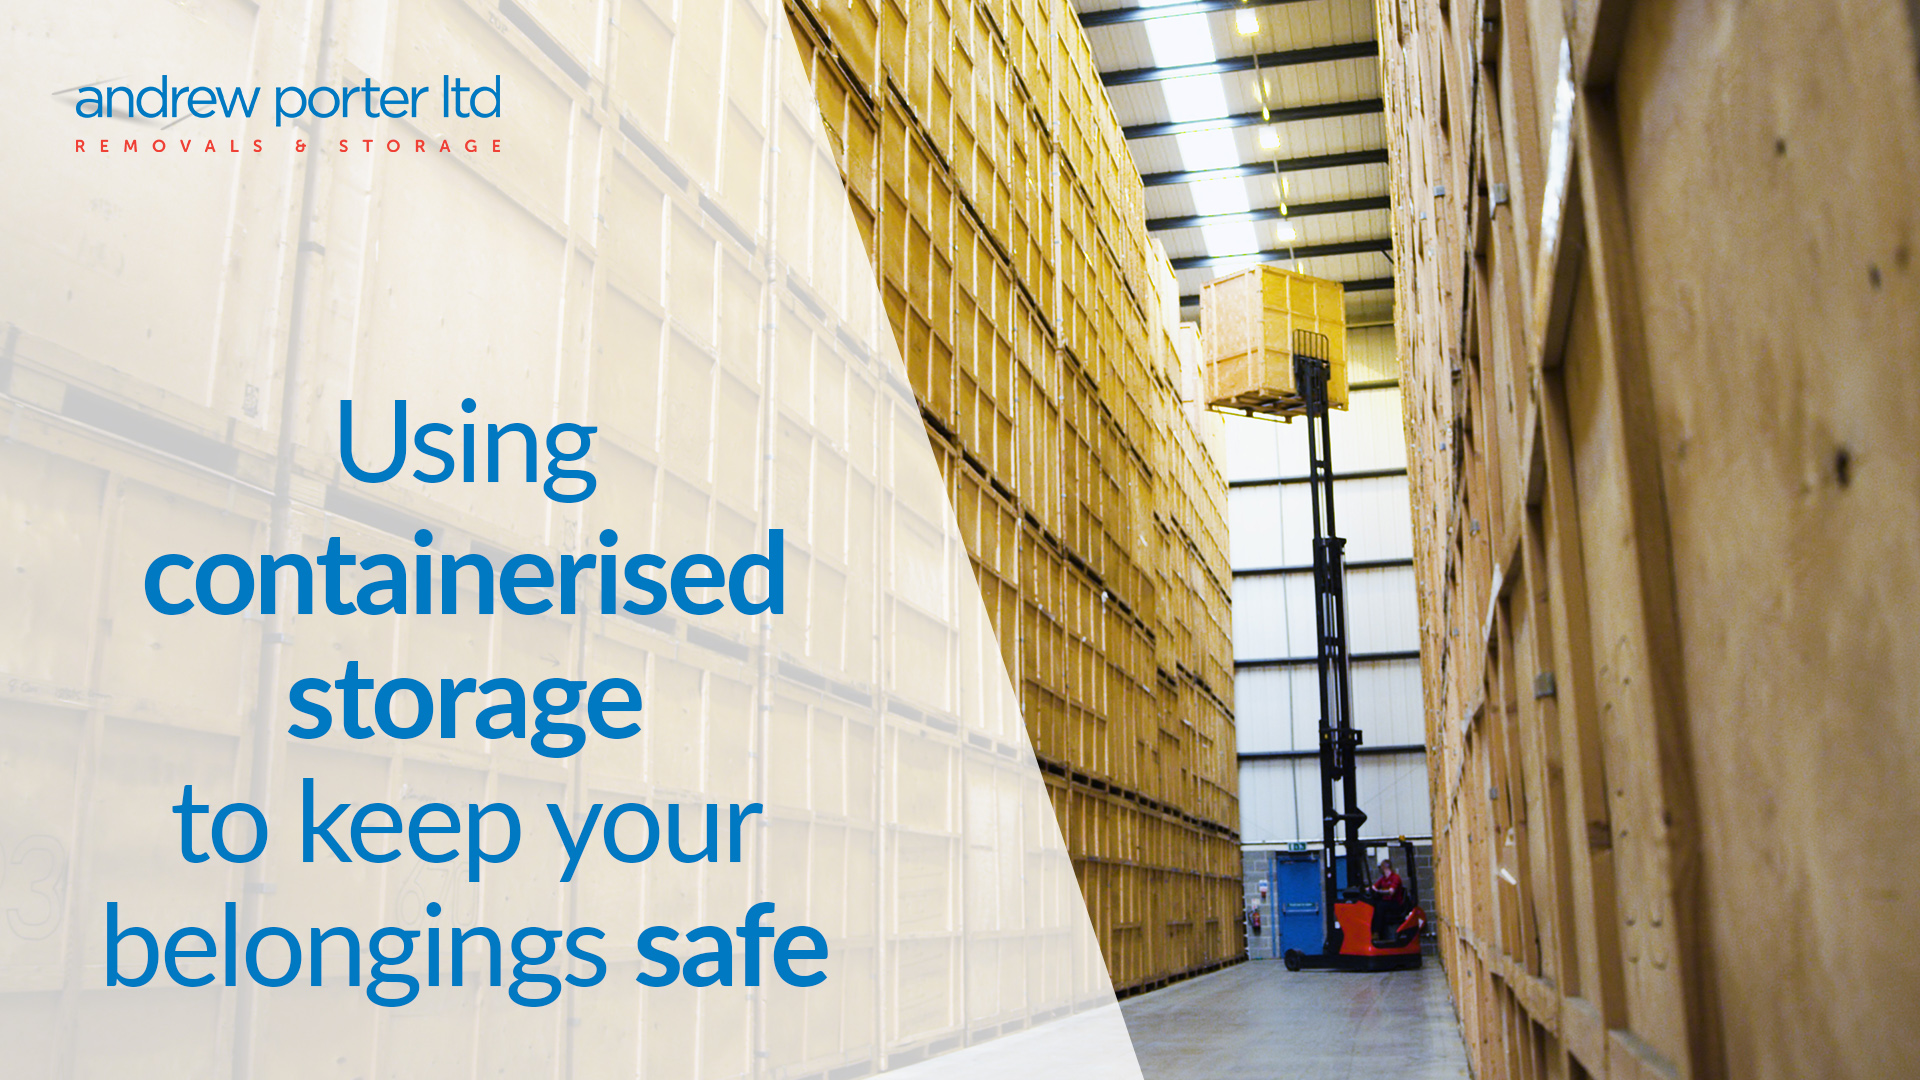 Using containerised storage to keep your belongings safe